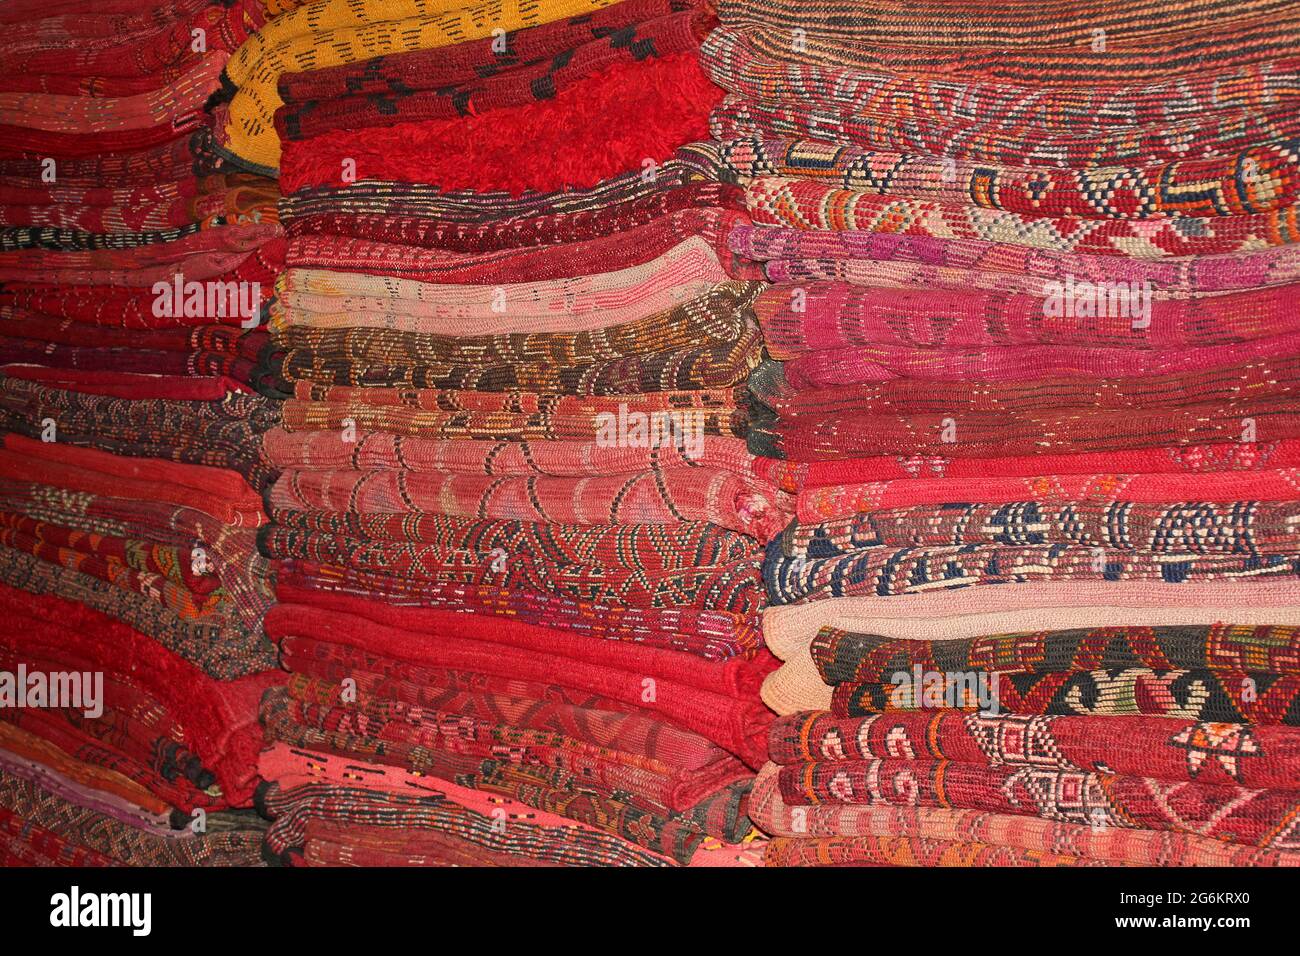 Piles Of Carpets In A Carpet Shop in the Souk Essaouira, Morocco Stock Photo